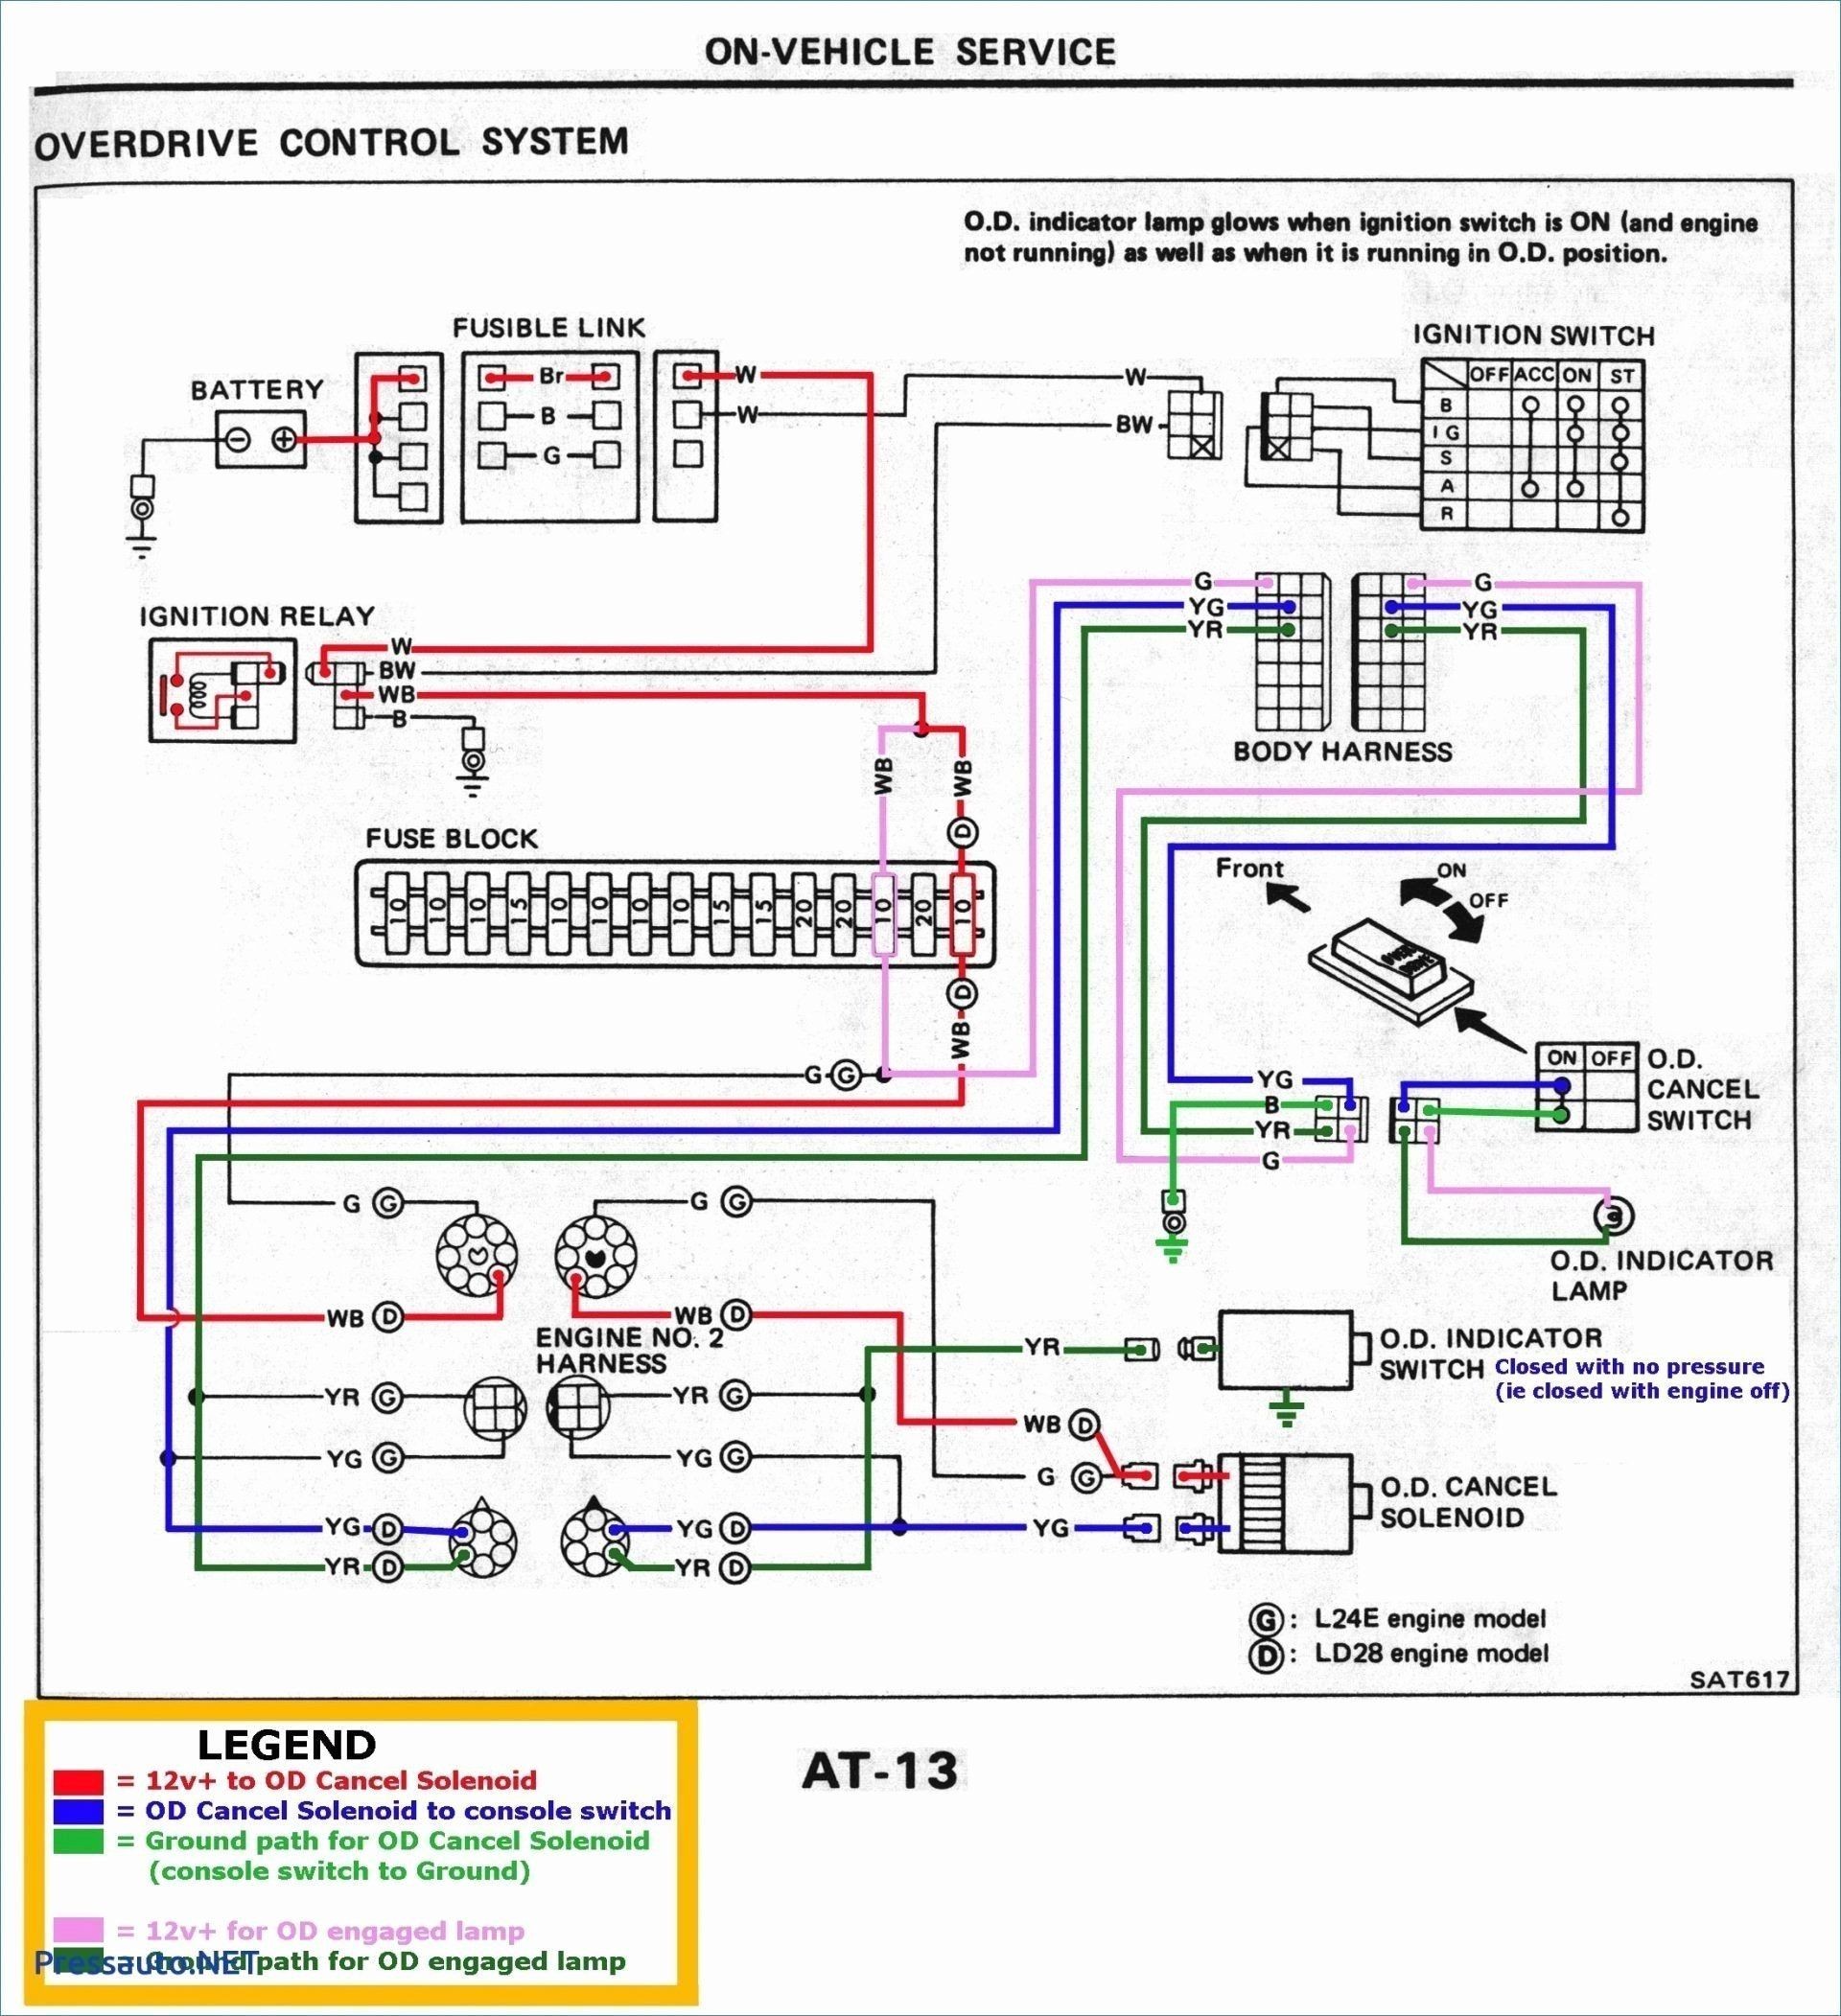 Wiring Diagram for Kmise Pickups to Switch Technical Drawing Book Pdf In 2020